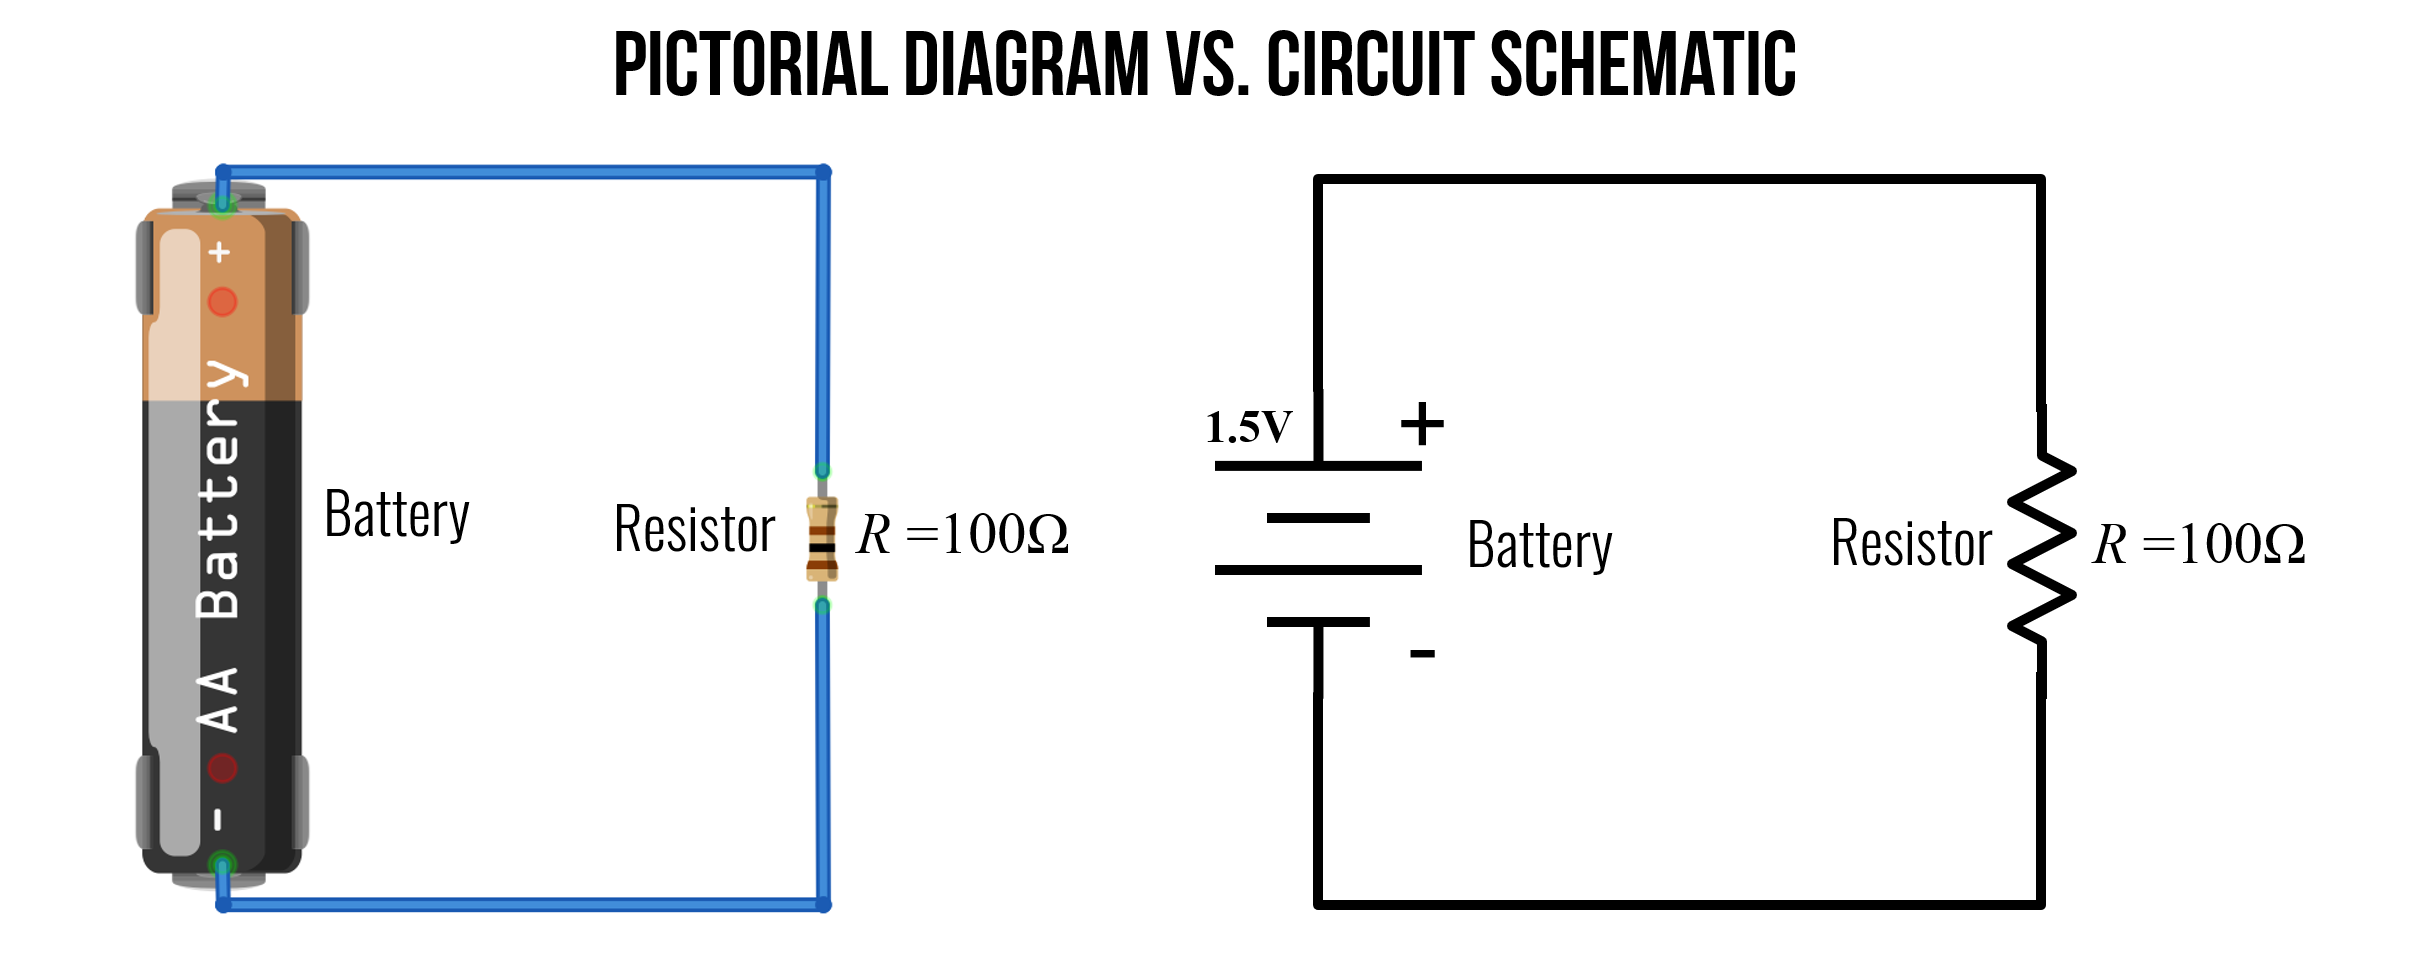 Image shows a pictorial representation of a basic circuit with a 1.5V battery, a switch, a resistor, and an LED along with a circuit schematic reprentation